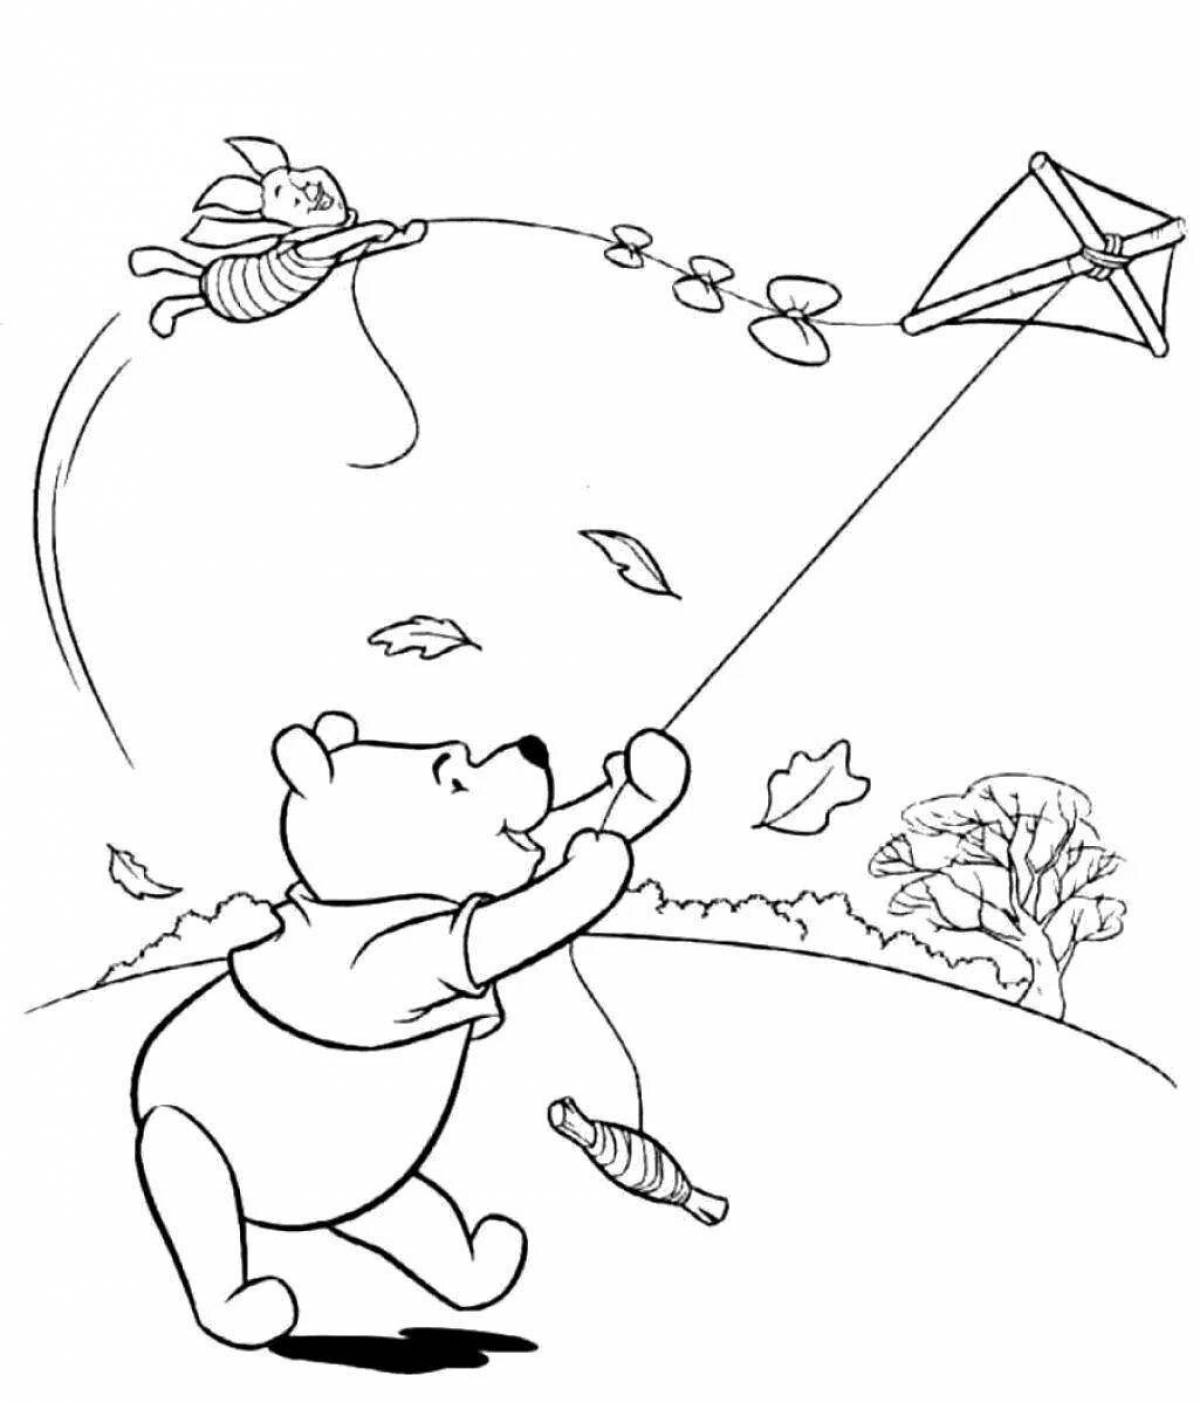 Strong wind coloring pages for children